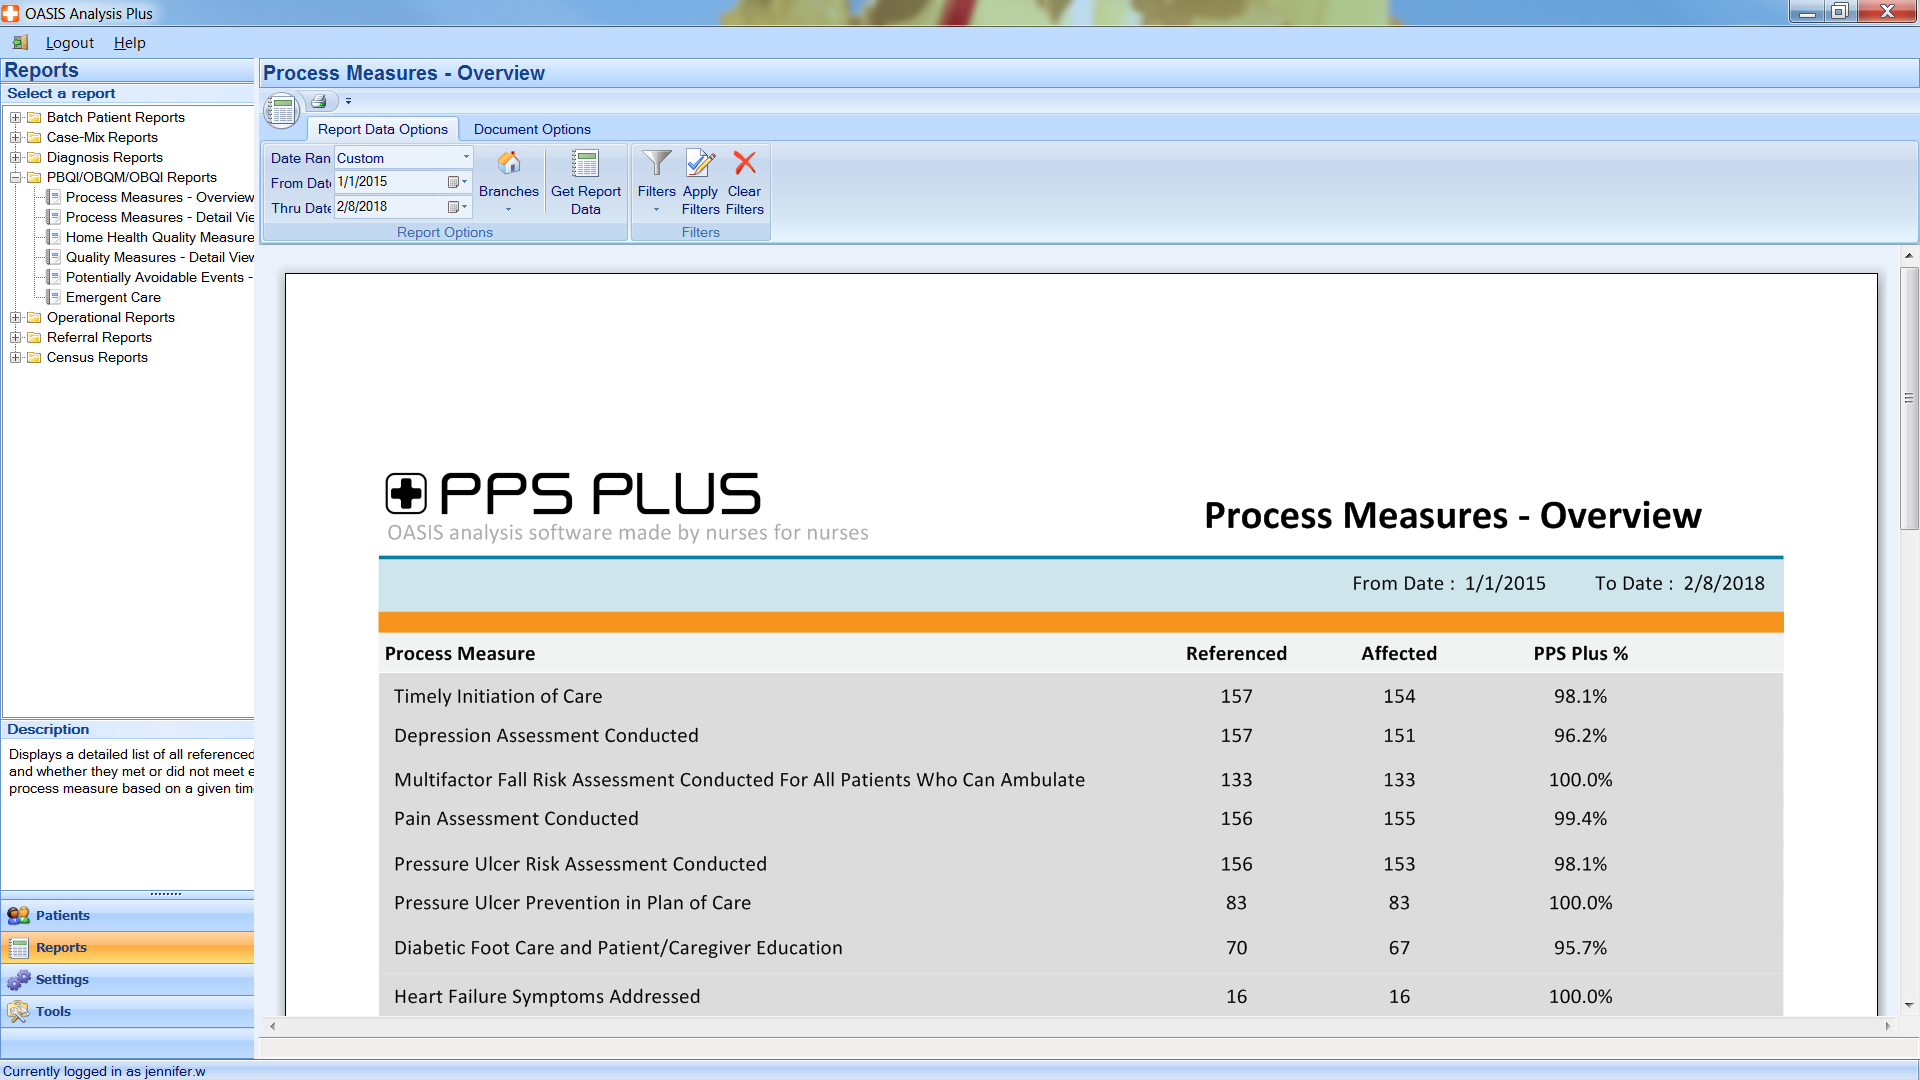 Process measures - overview